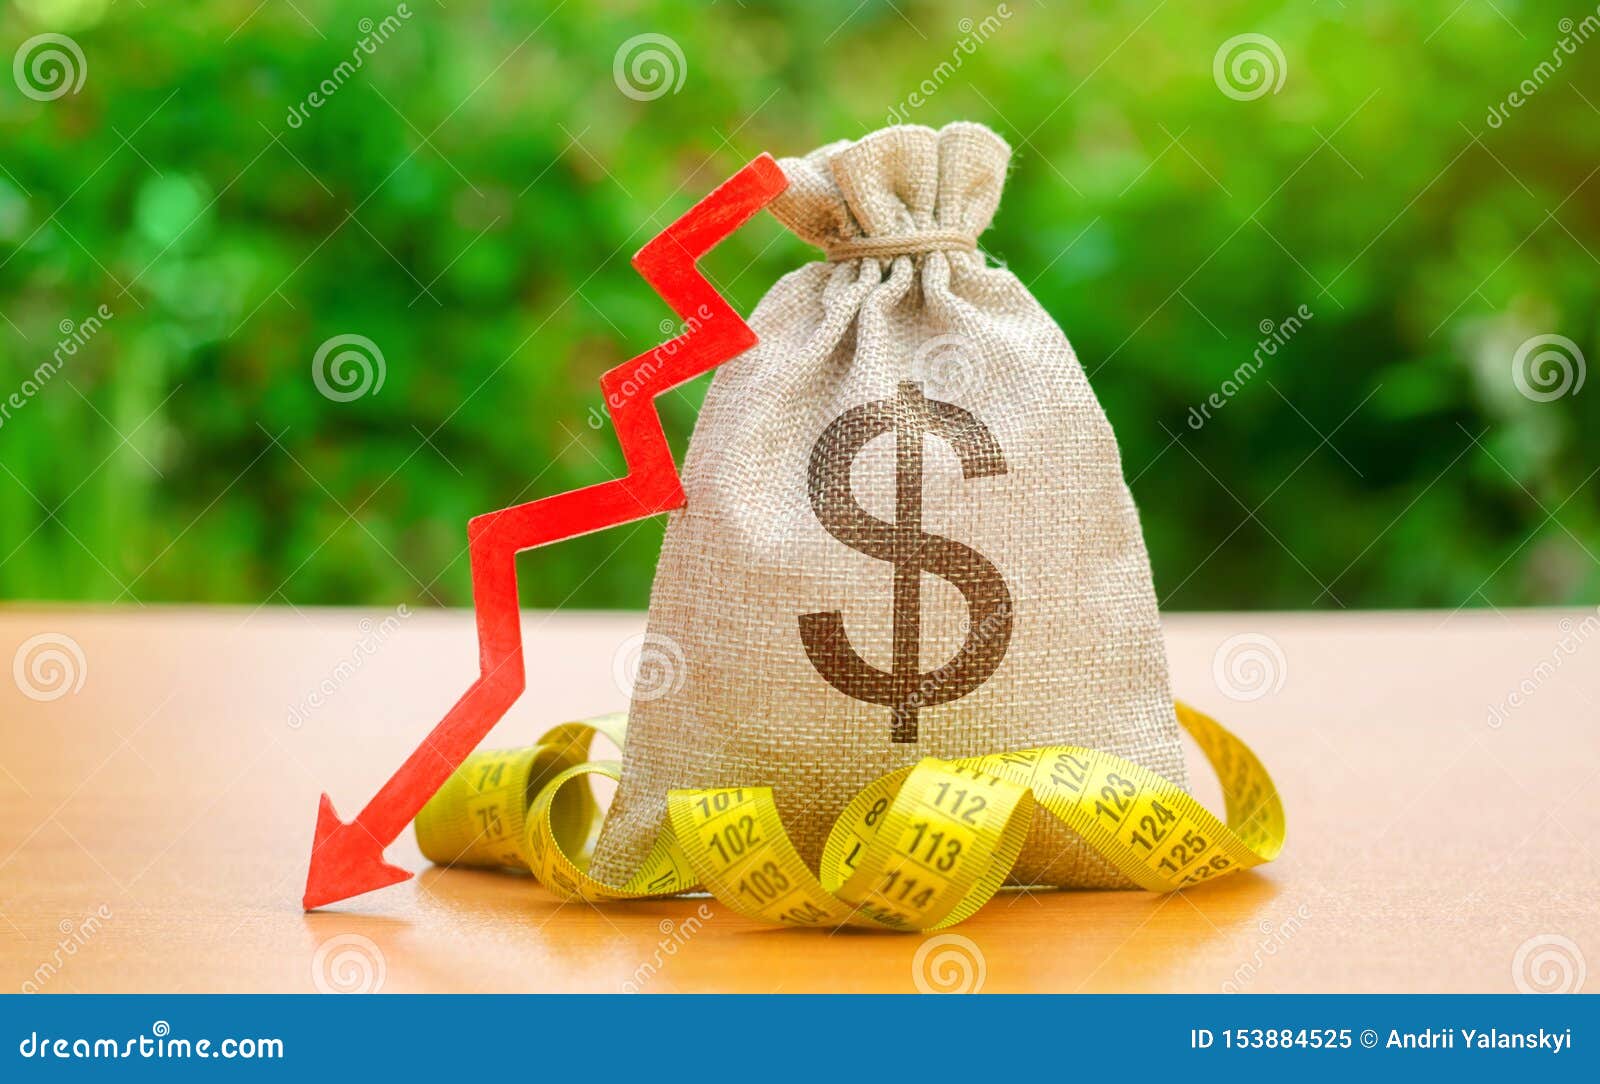 bag with money and tape measure with arrow to down. falling wages and welfare. low profits and liquidity of investments. the